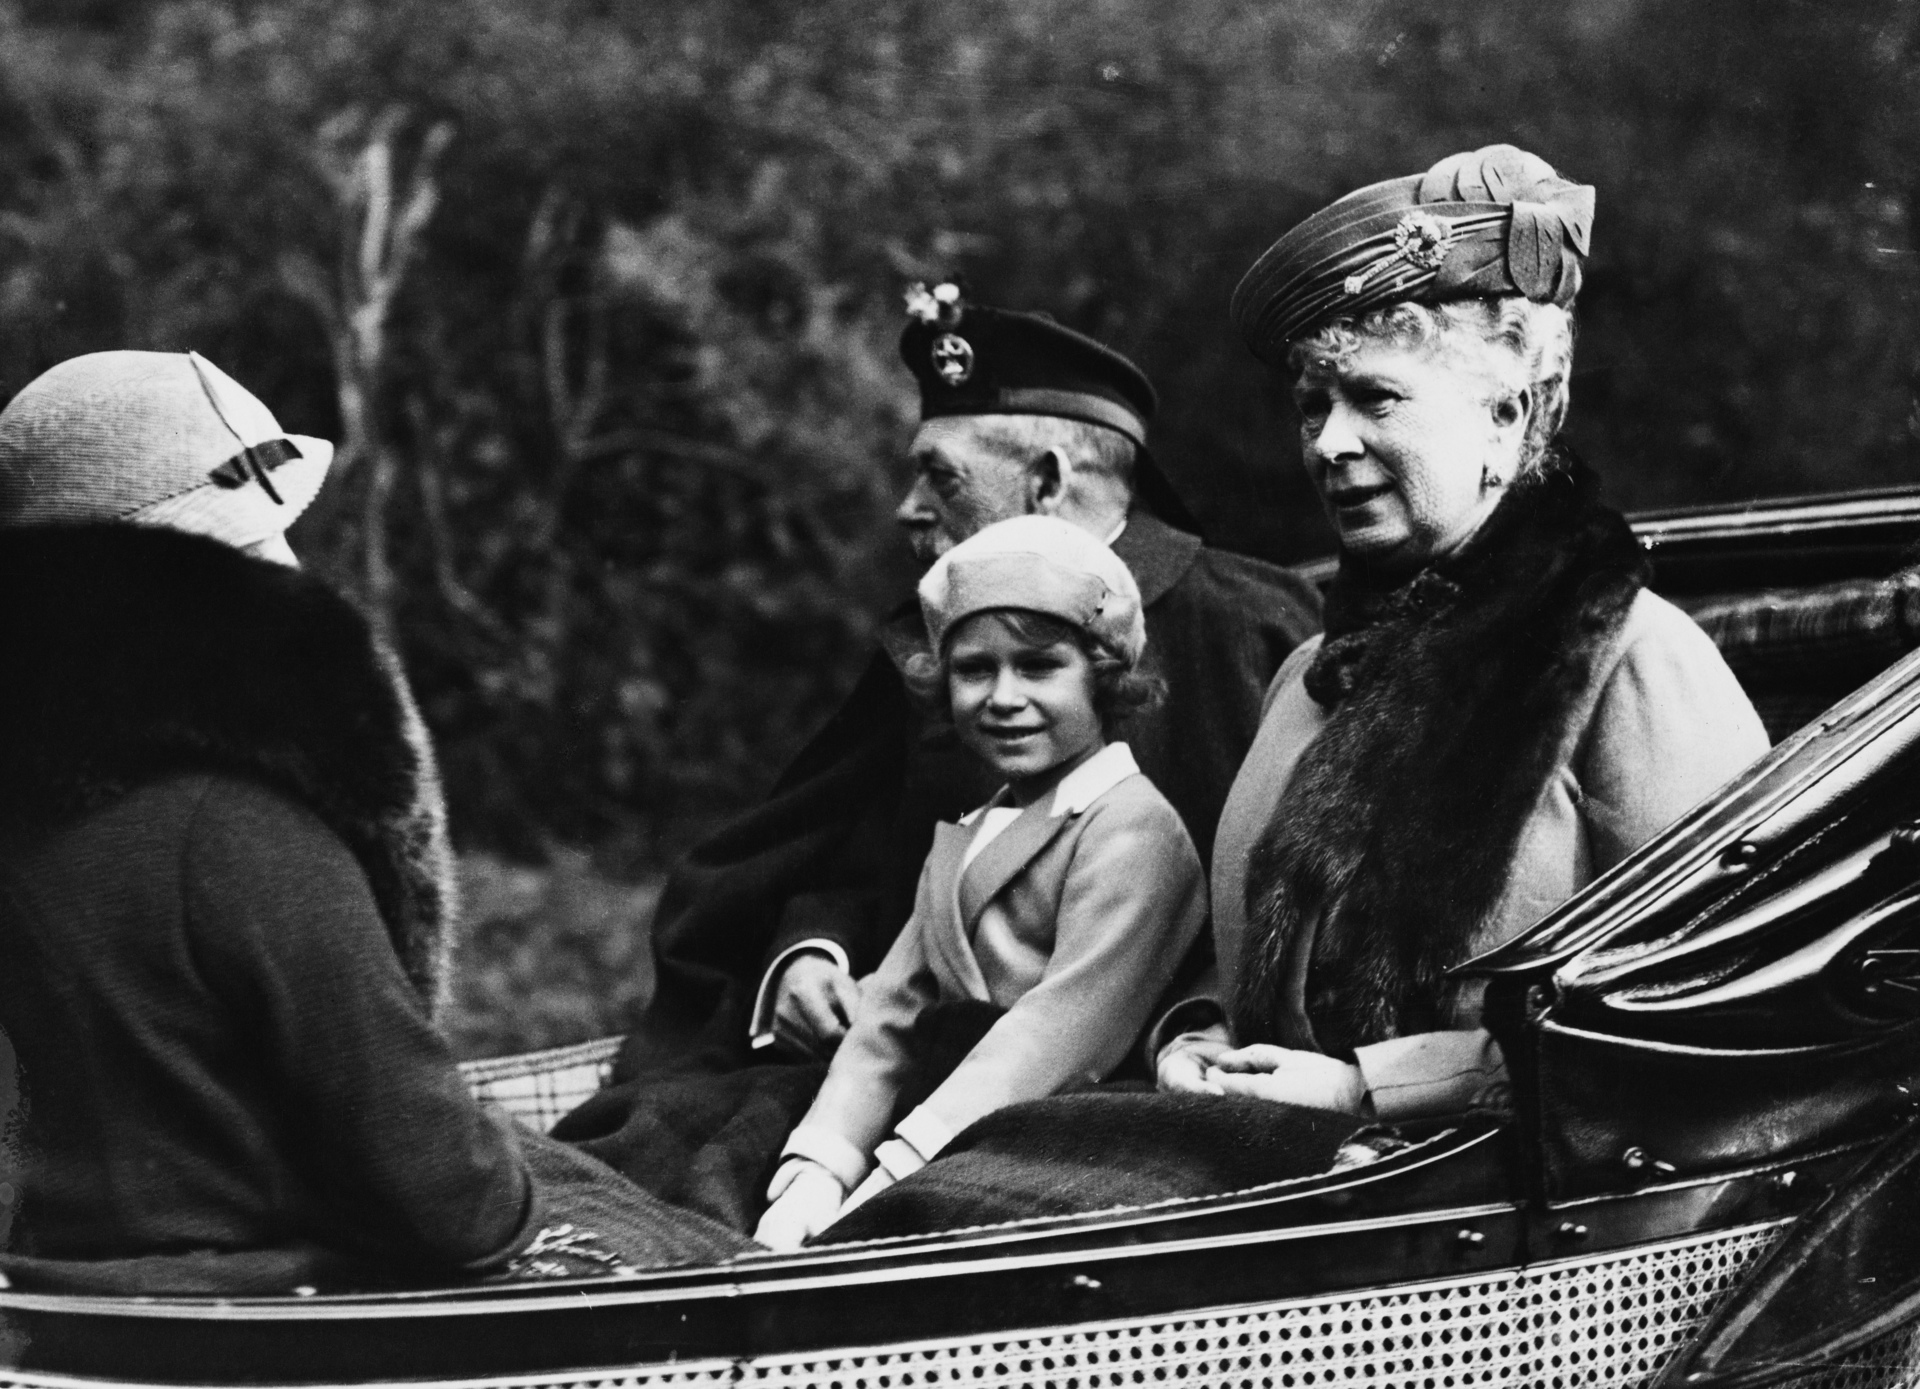 Princess Elizabeth seated between her grandfather King George V and grandmother Queen Mary of Teck  as they ride in a carriage back to Balmoral Castle from Crathie Kirk near Braemar in Scotland in August 1935.